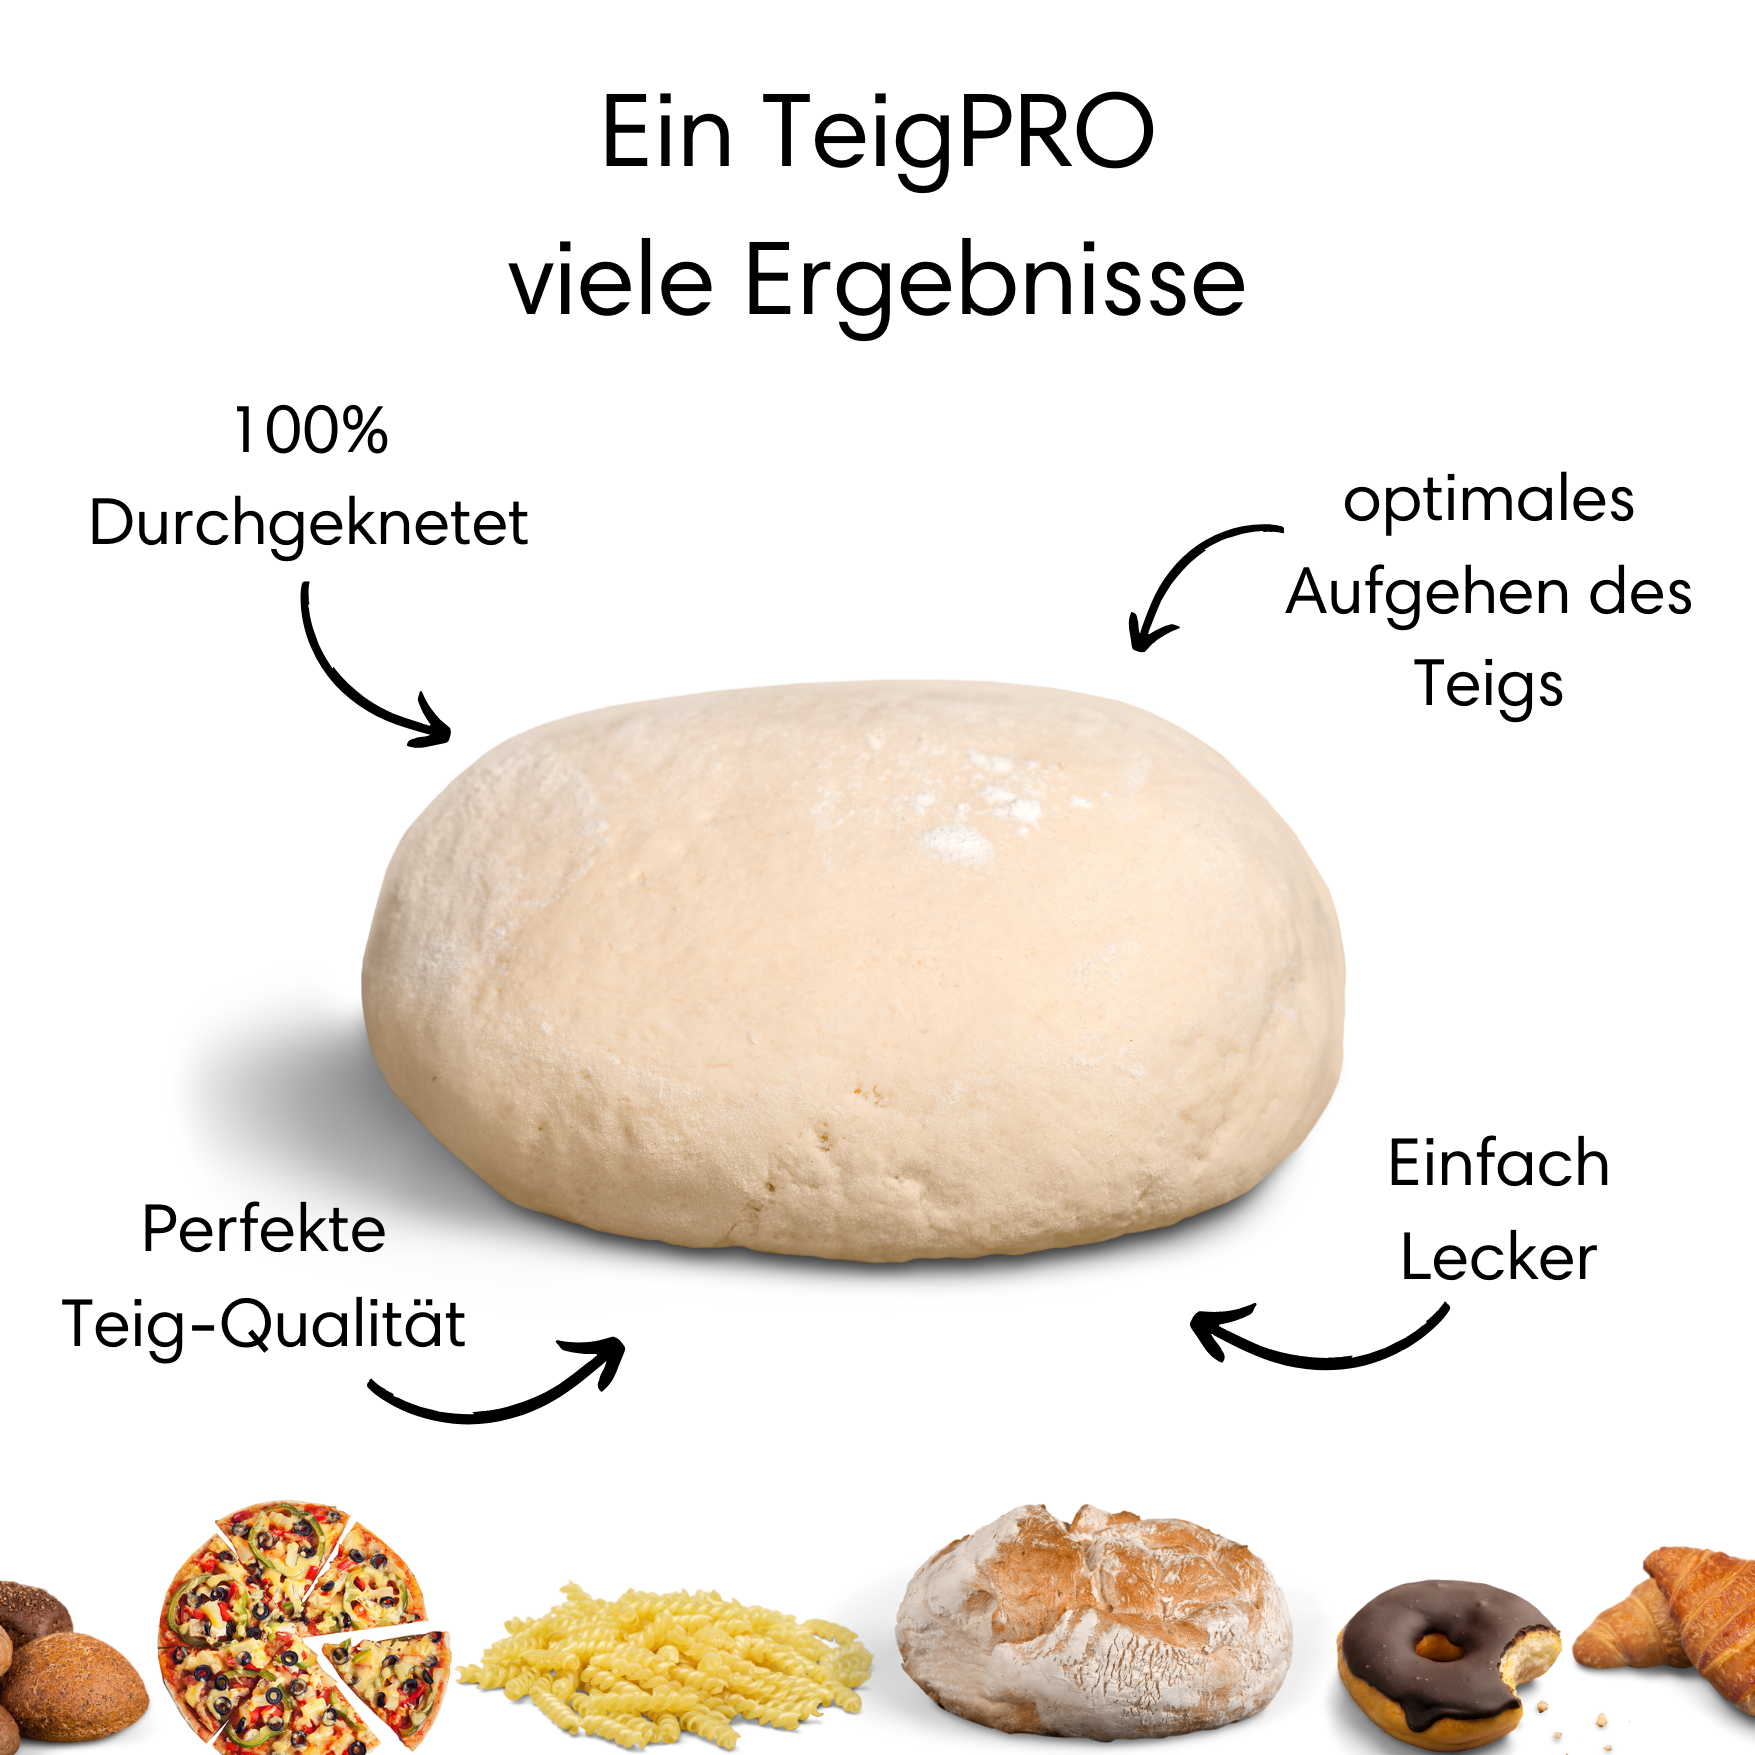 DoughPRO - knife protection suitable for the Thermomix TM6 and TM5